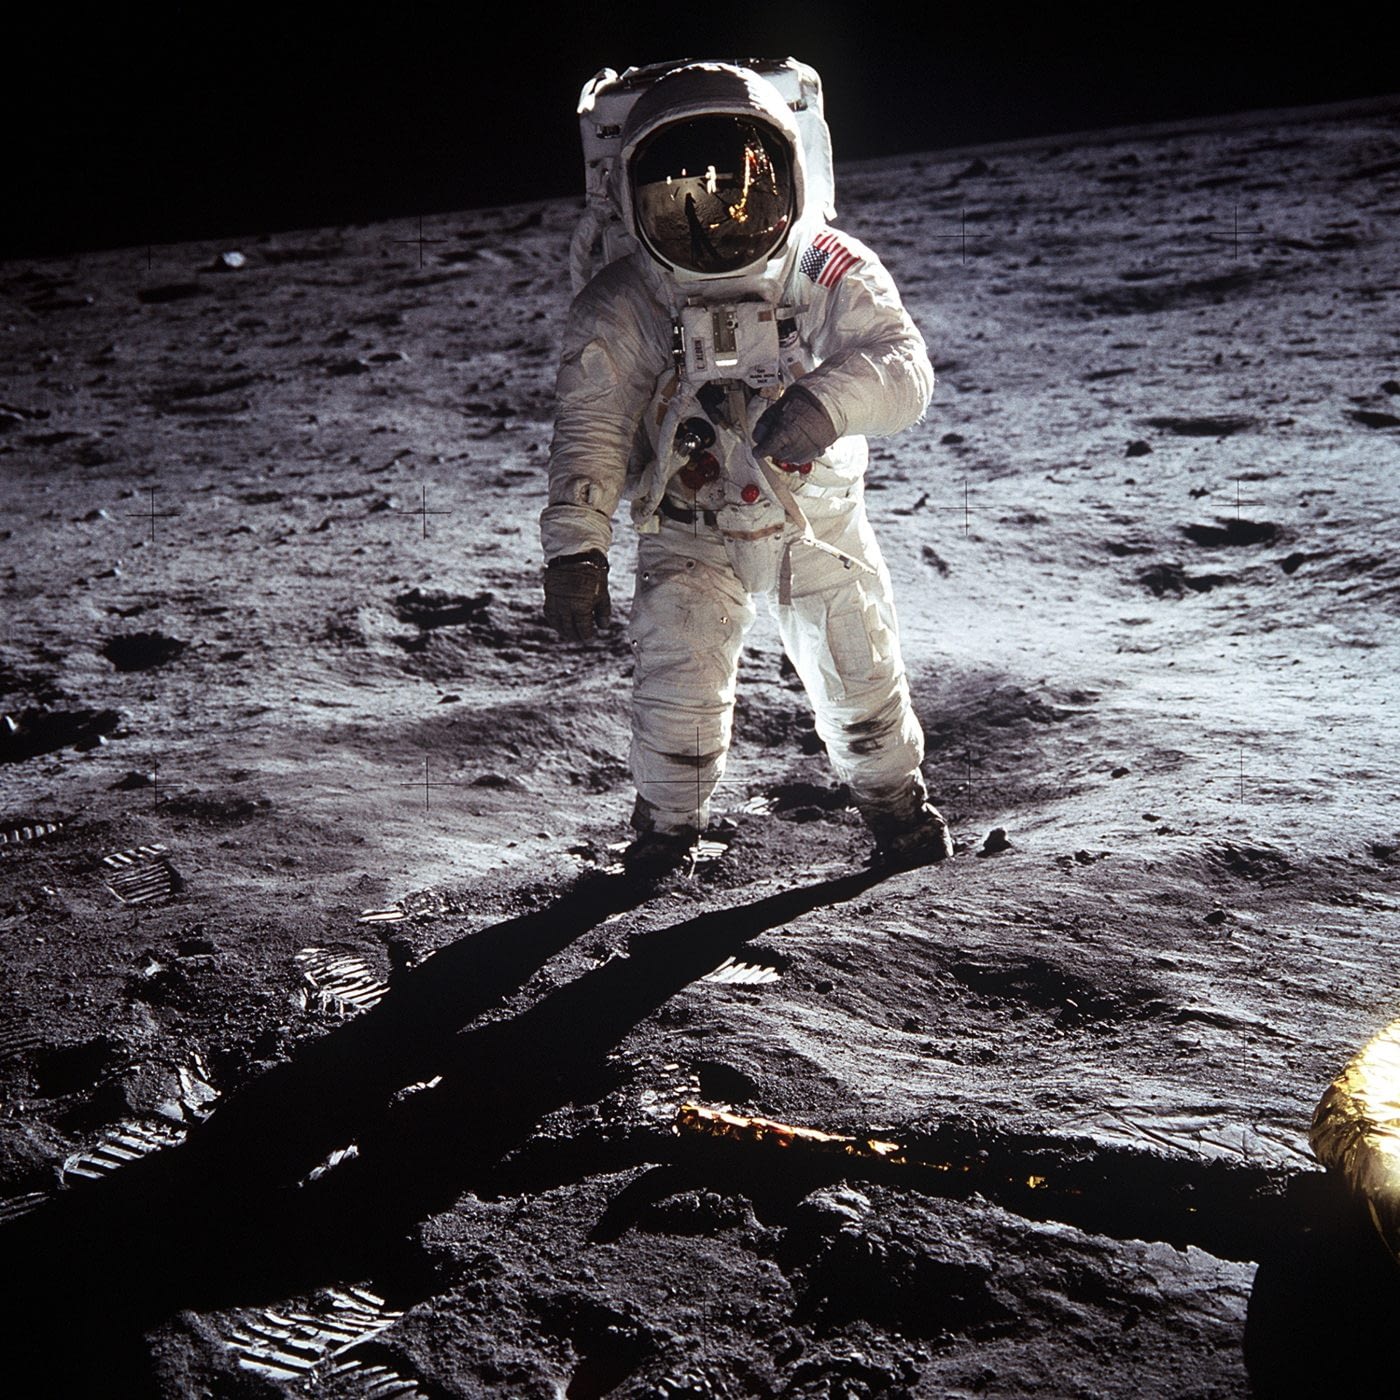 Image: Buzz Aldrin standing in a spacesuit on the moon